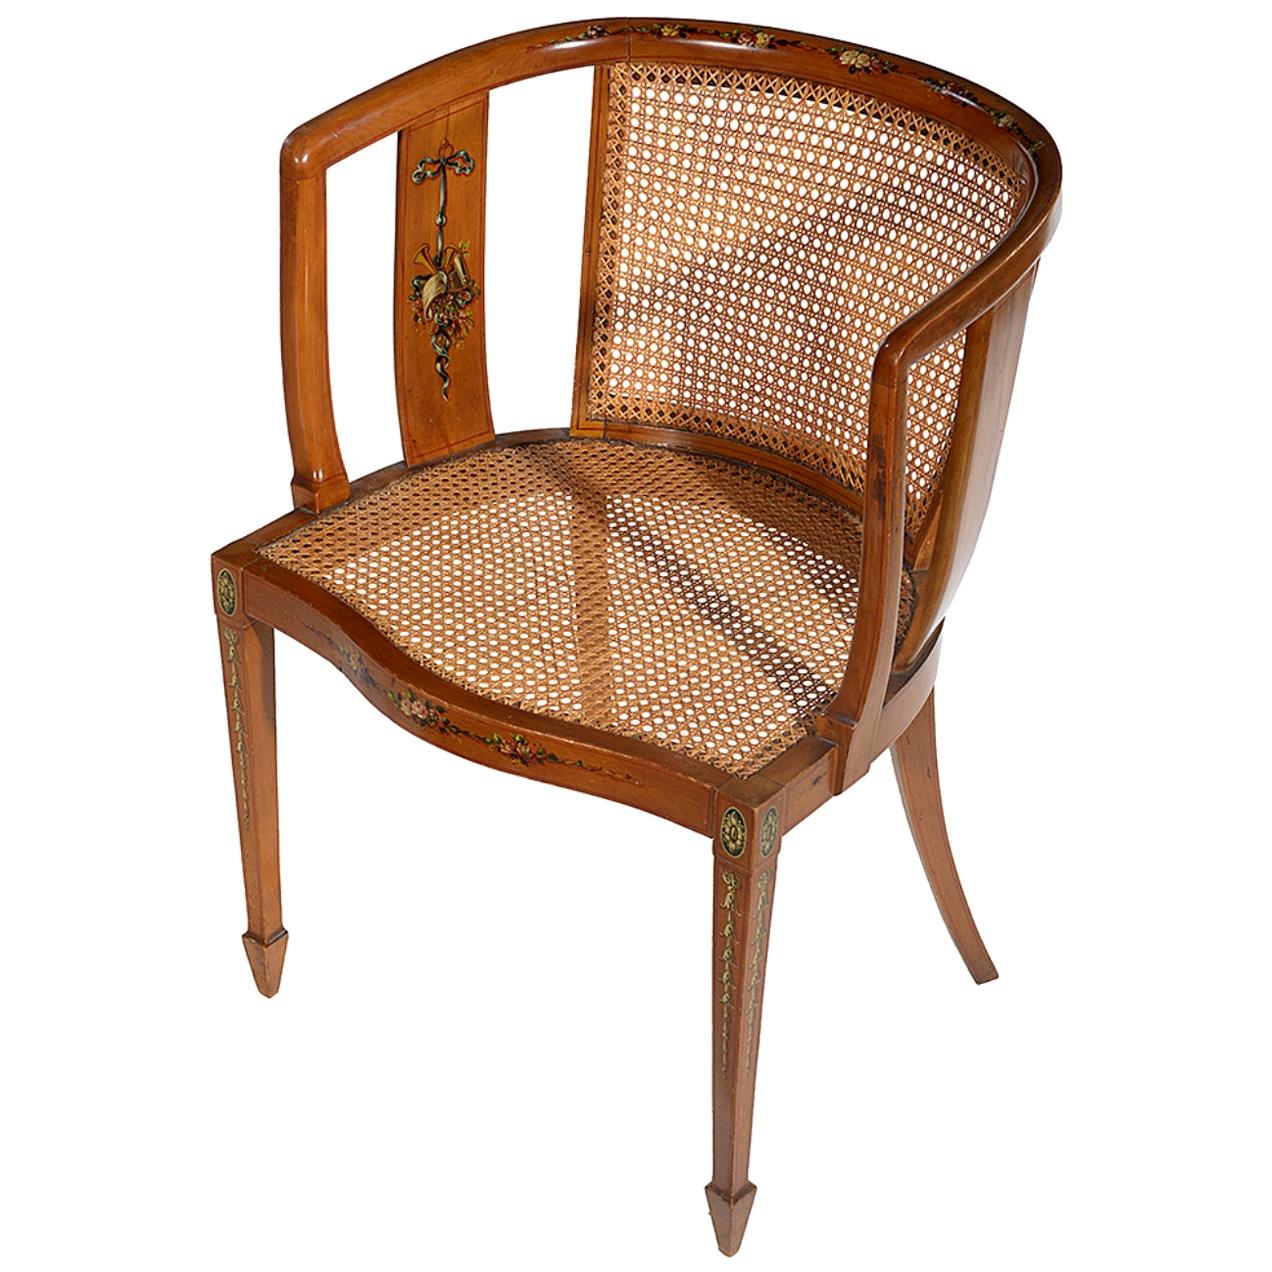 Sheraton Style Satinwood Chair with Painted Decoration For Sale